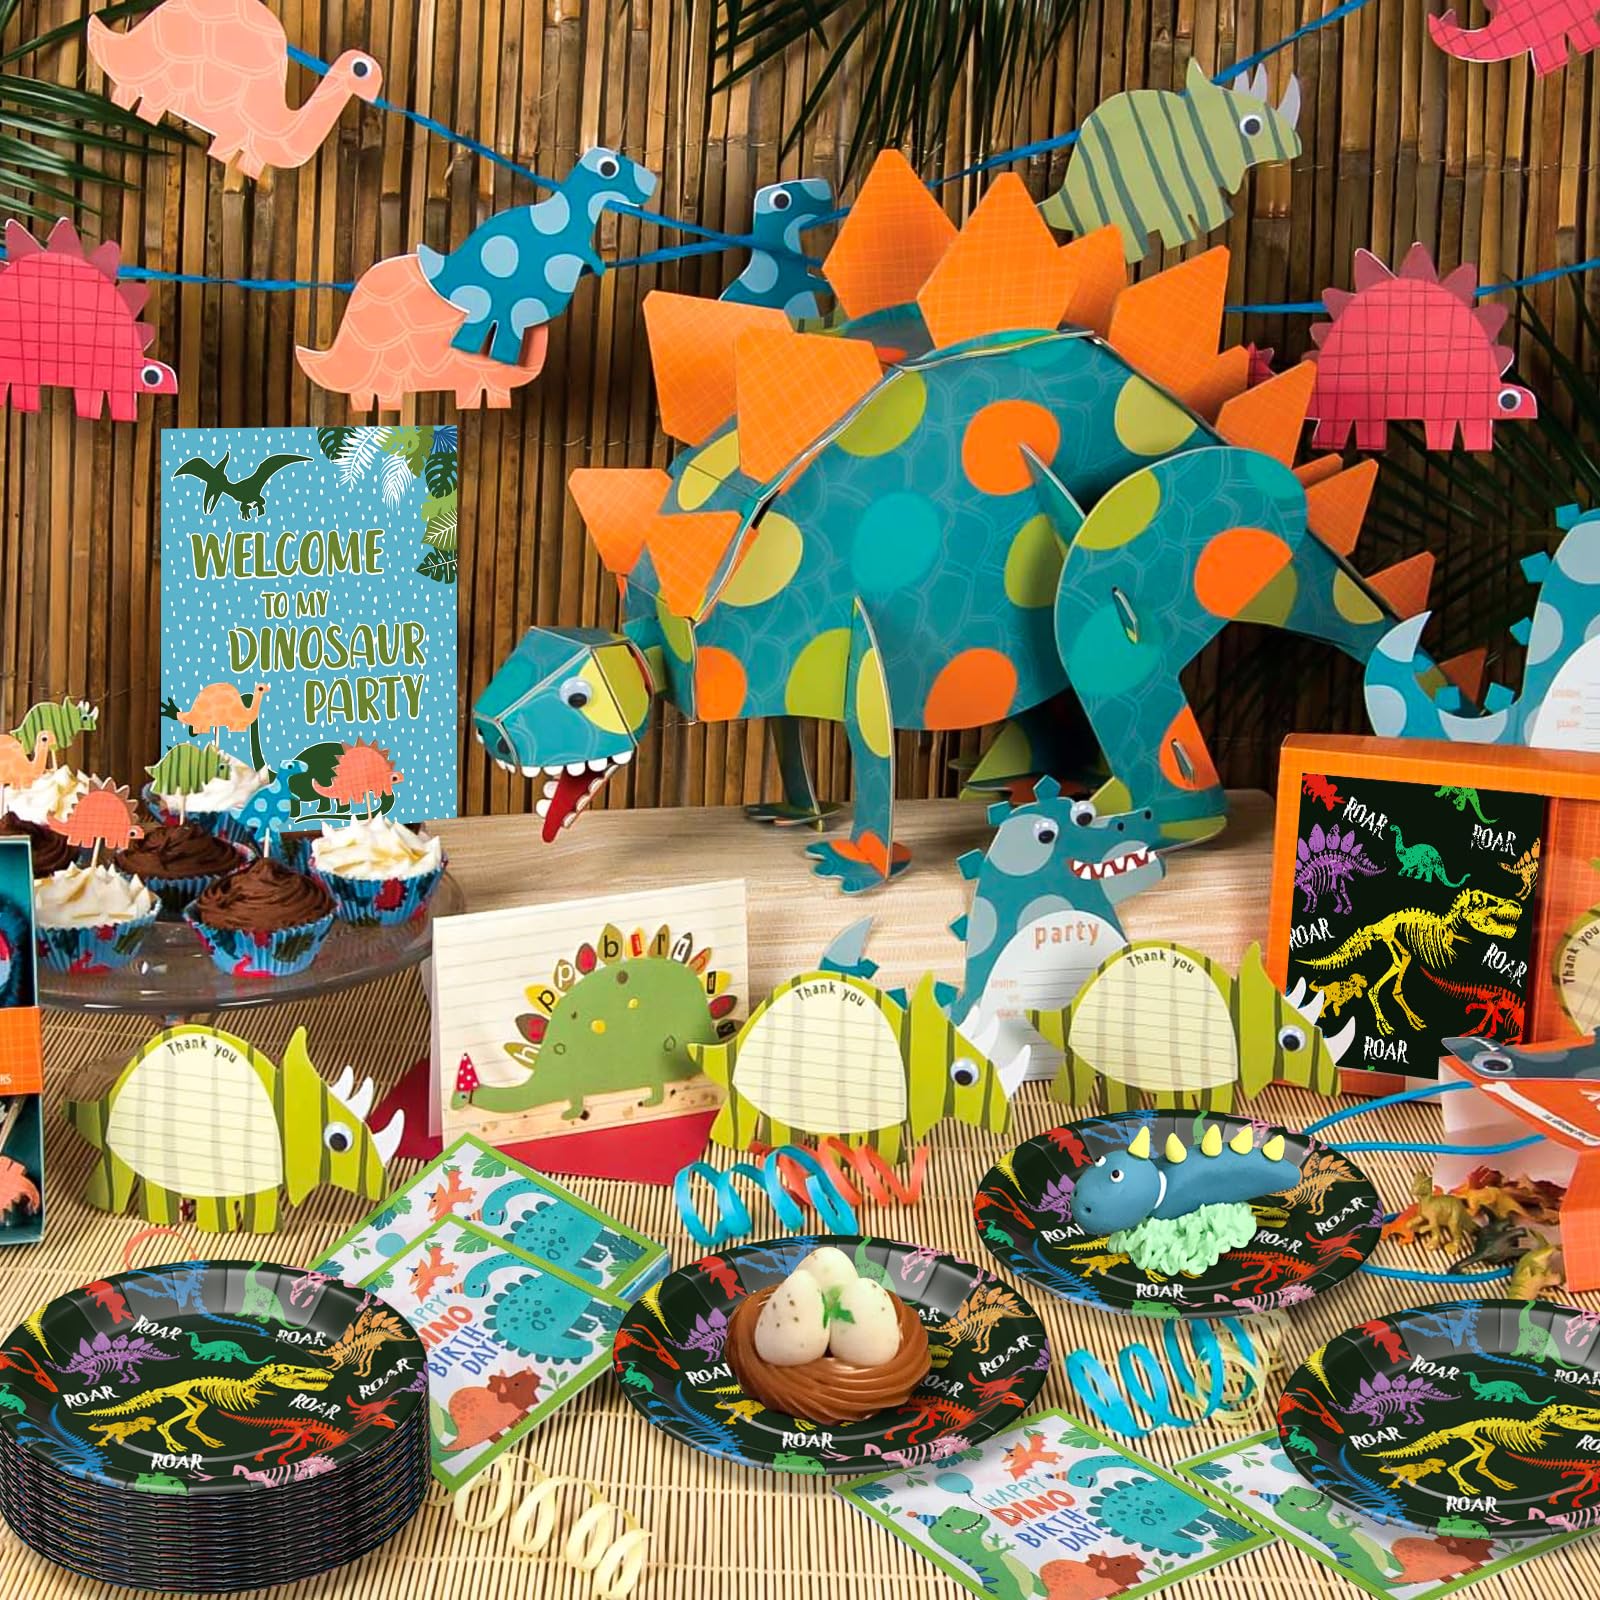 AFZMON Dinosaur Party Plates- 50 Pack 7’’ Disposable Three Rex Paper Cake Plates, Dinosaur World Themed Birthday Party Supplies Decorations Tableware for Kids Baby Shower